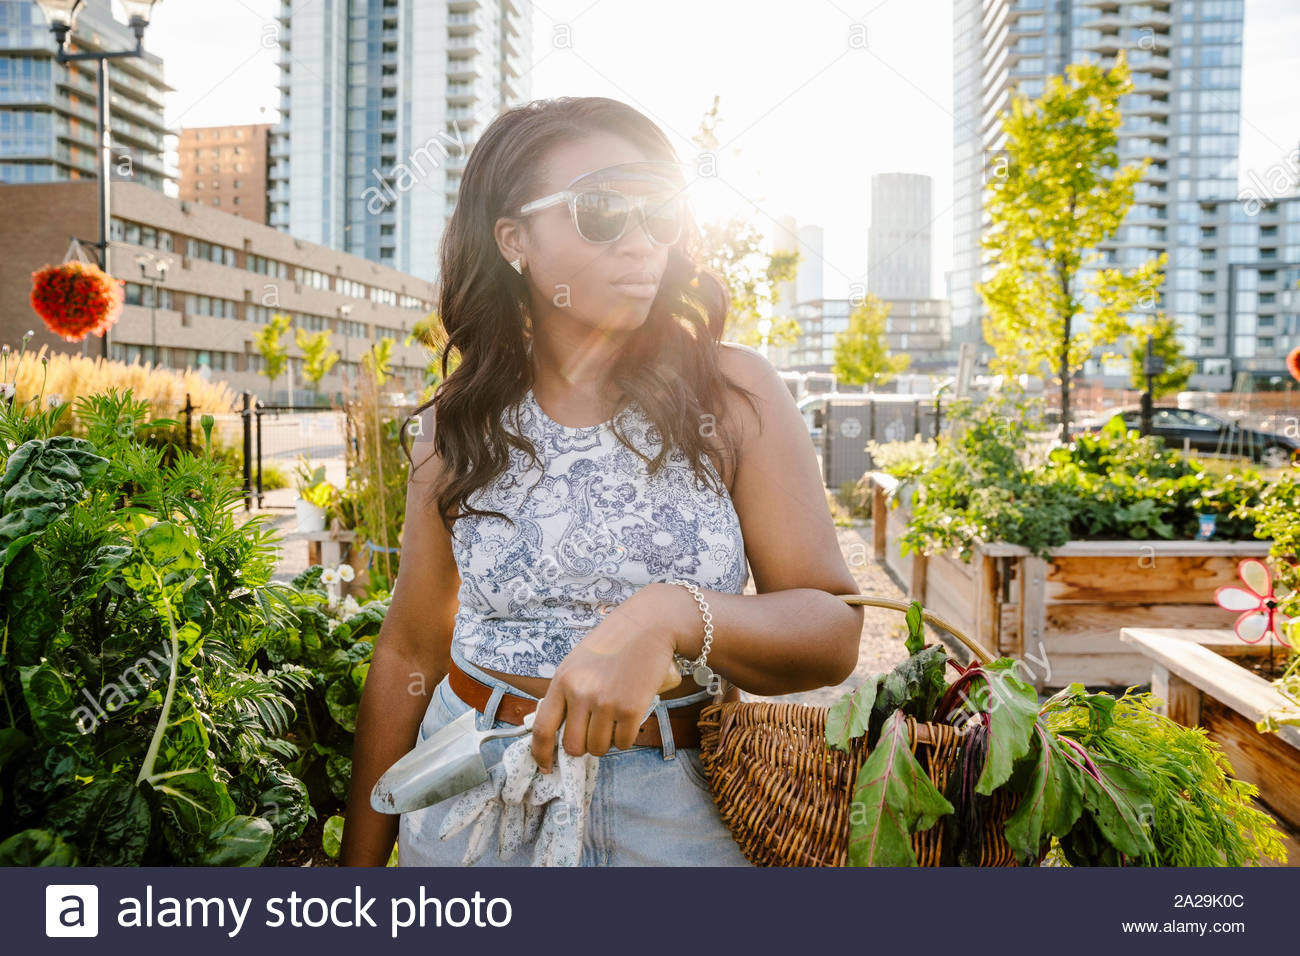 Portrait confident young woman harvesting fresh vegetables in sunny, urban community garden Stock Photo